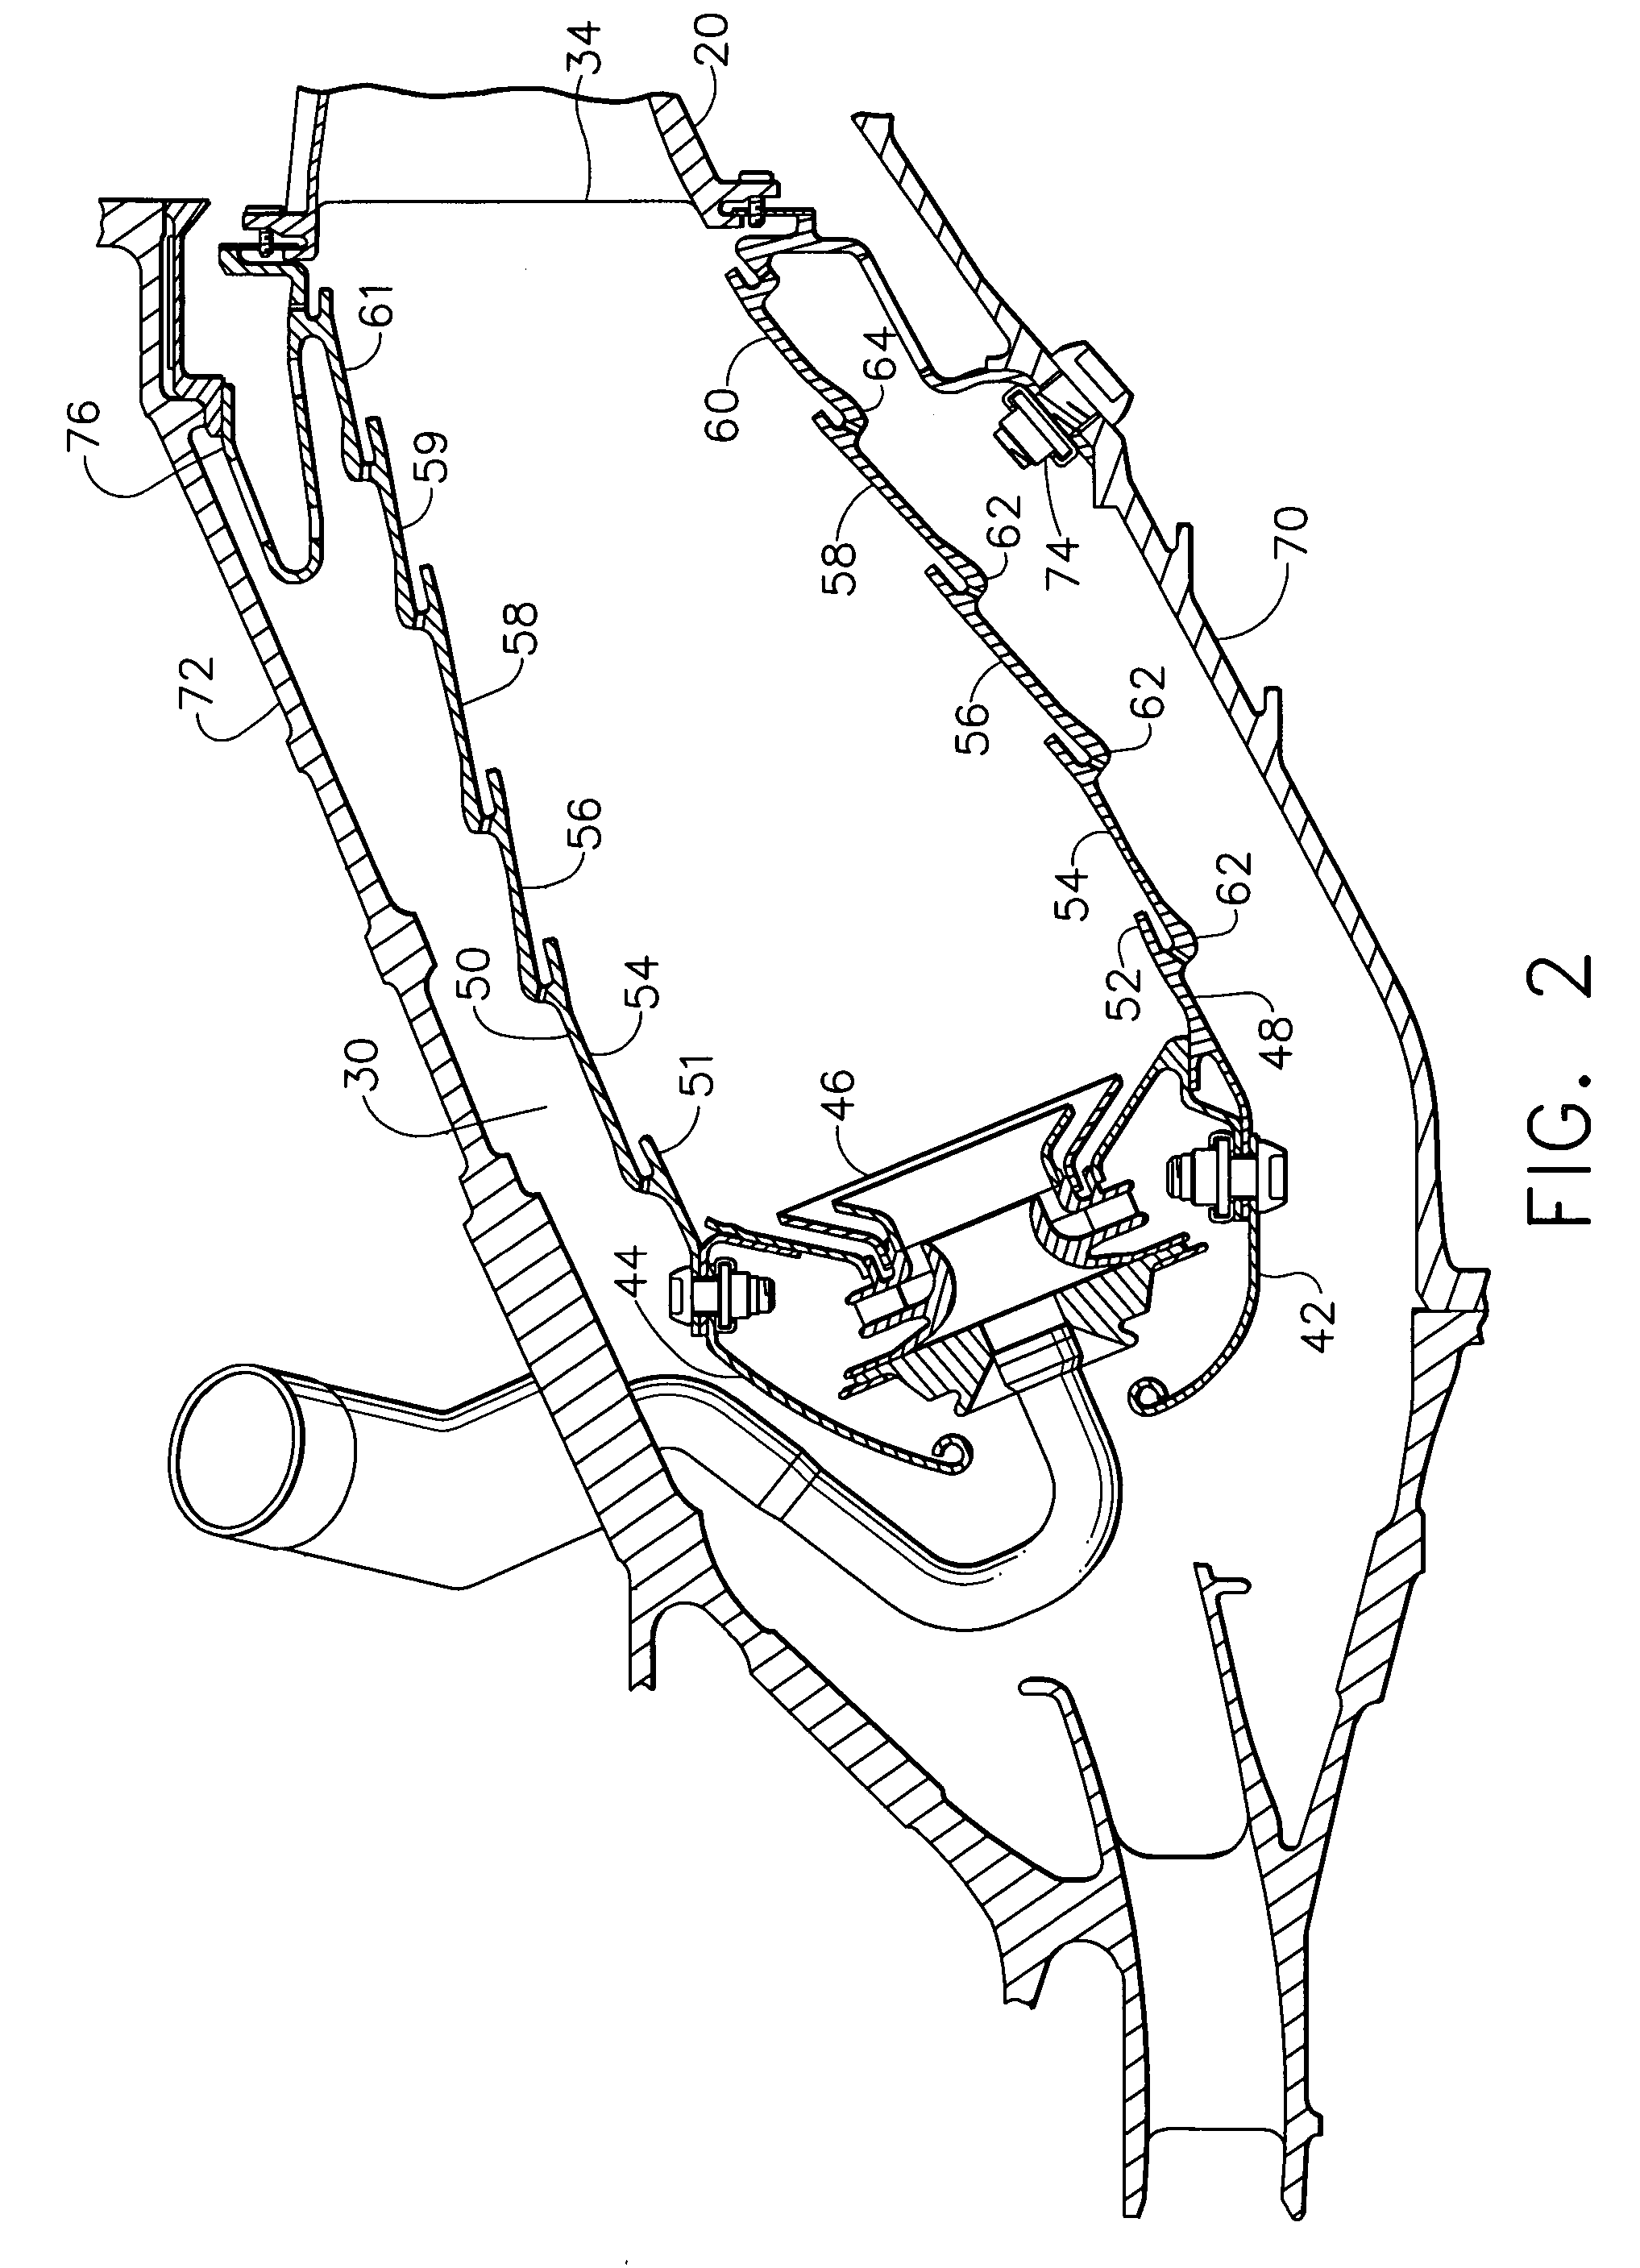 Method for repair and replacement of combustor liner panel